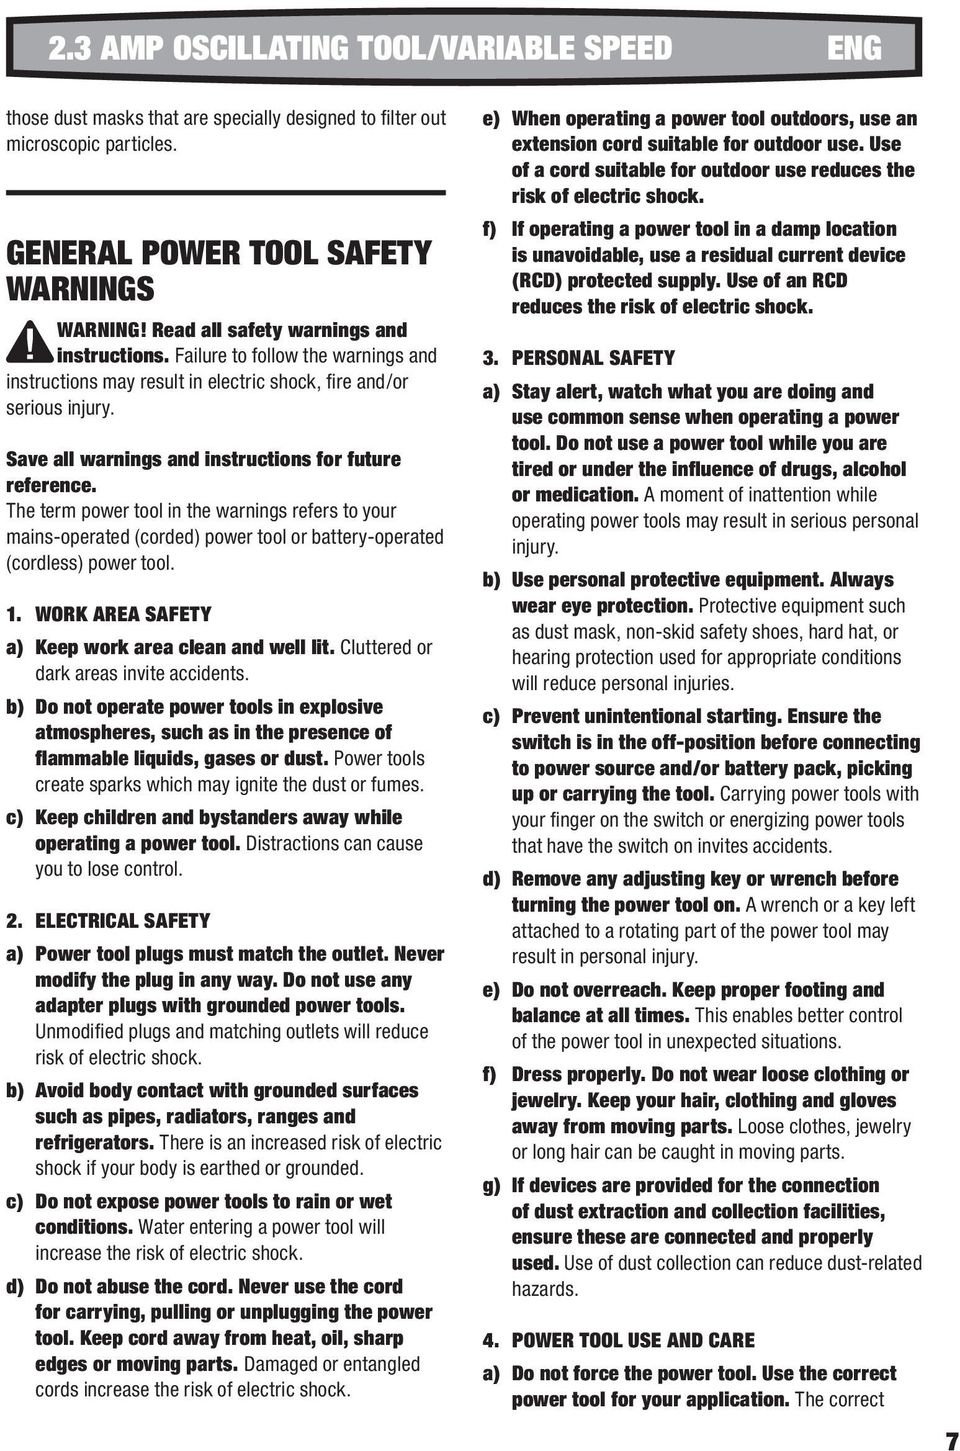 Save all warnings and instructions for future reference. The term power tool in the warnings refers to your mains-operated (corded) power tool or battery-operated (cordless) power tool. 1.